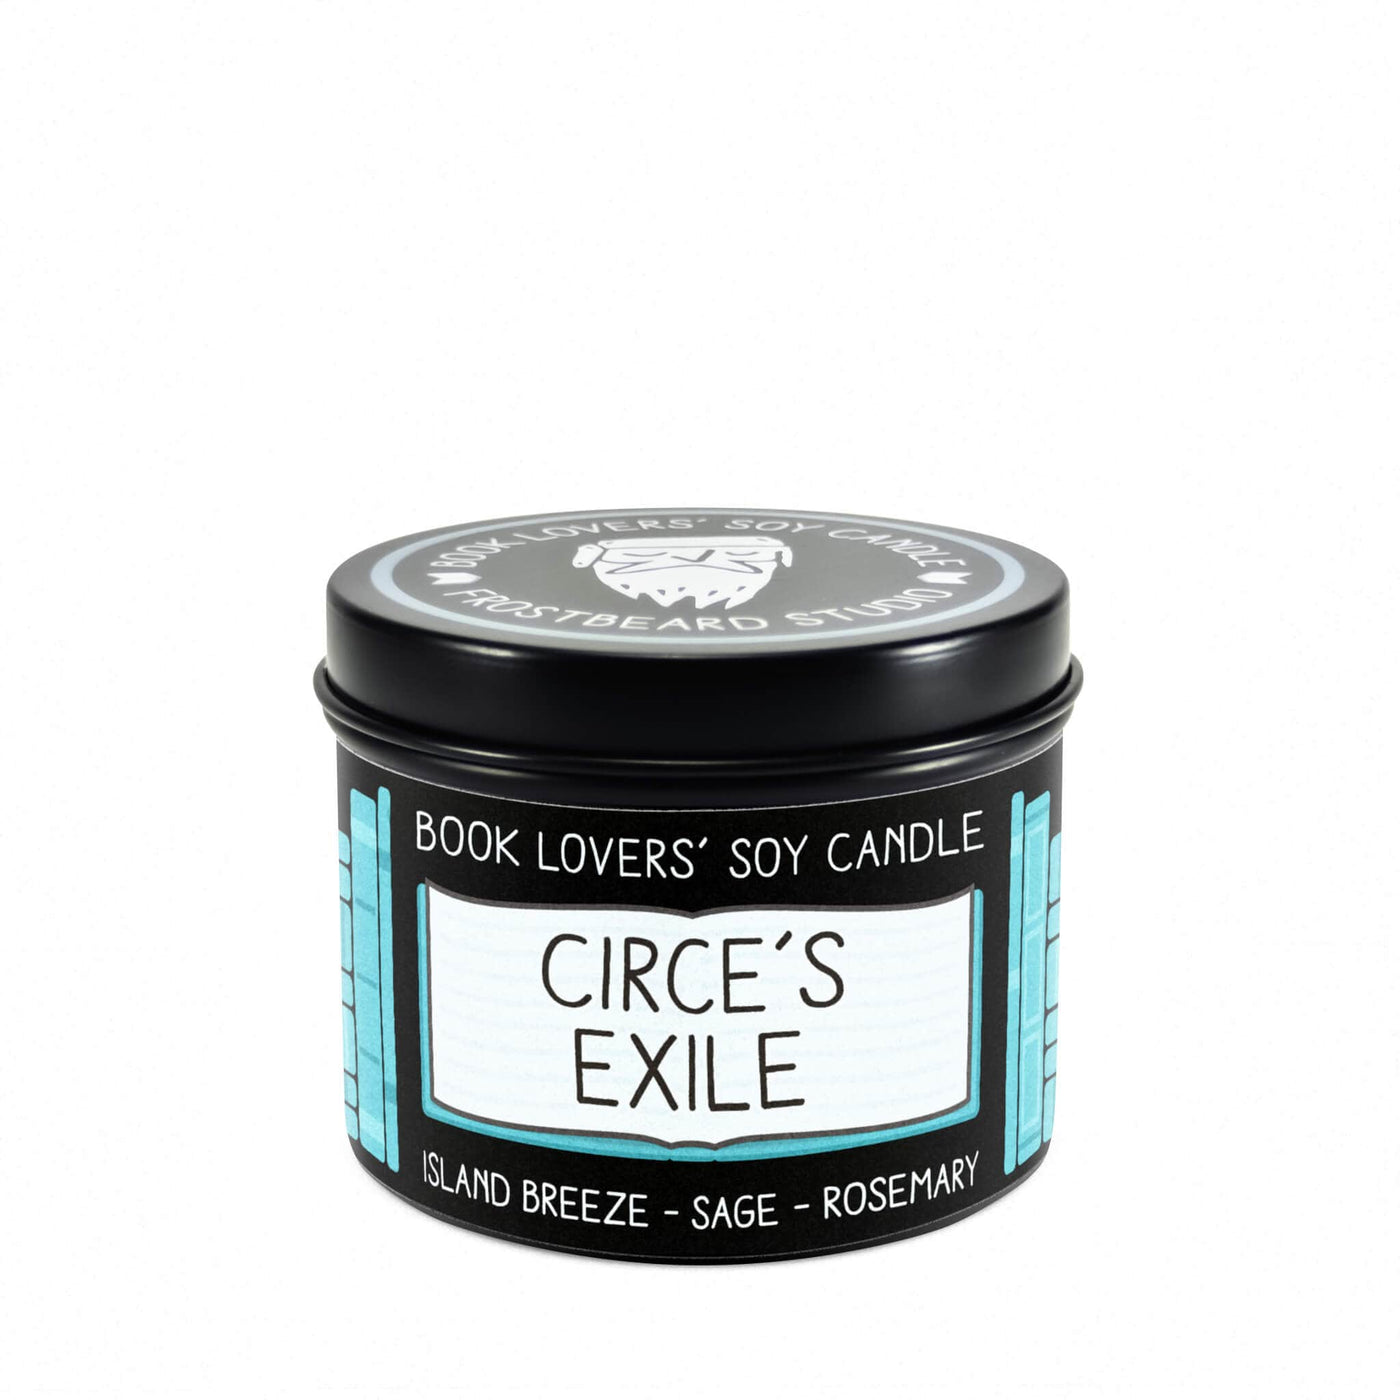 Circe's Exile - 4 oz Tin - Book Lovers' Soy Candle - Frostbeard Studio